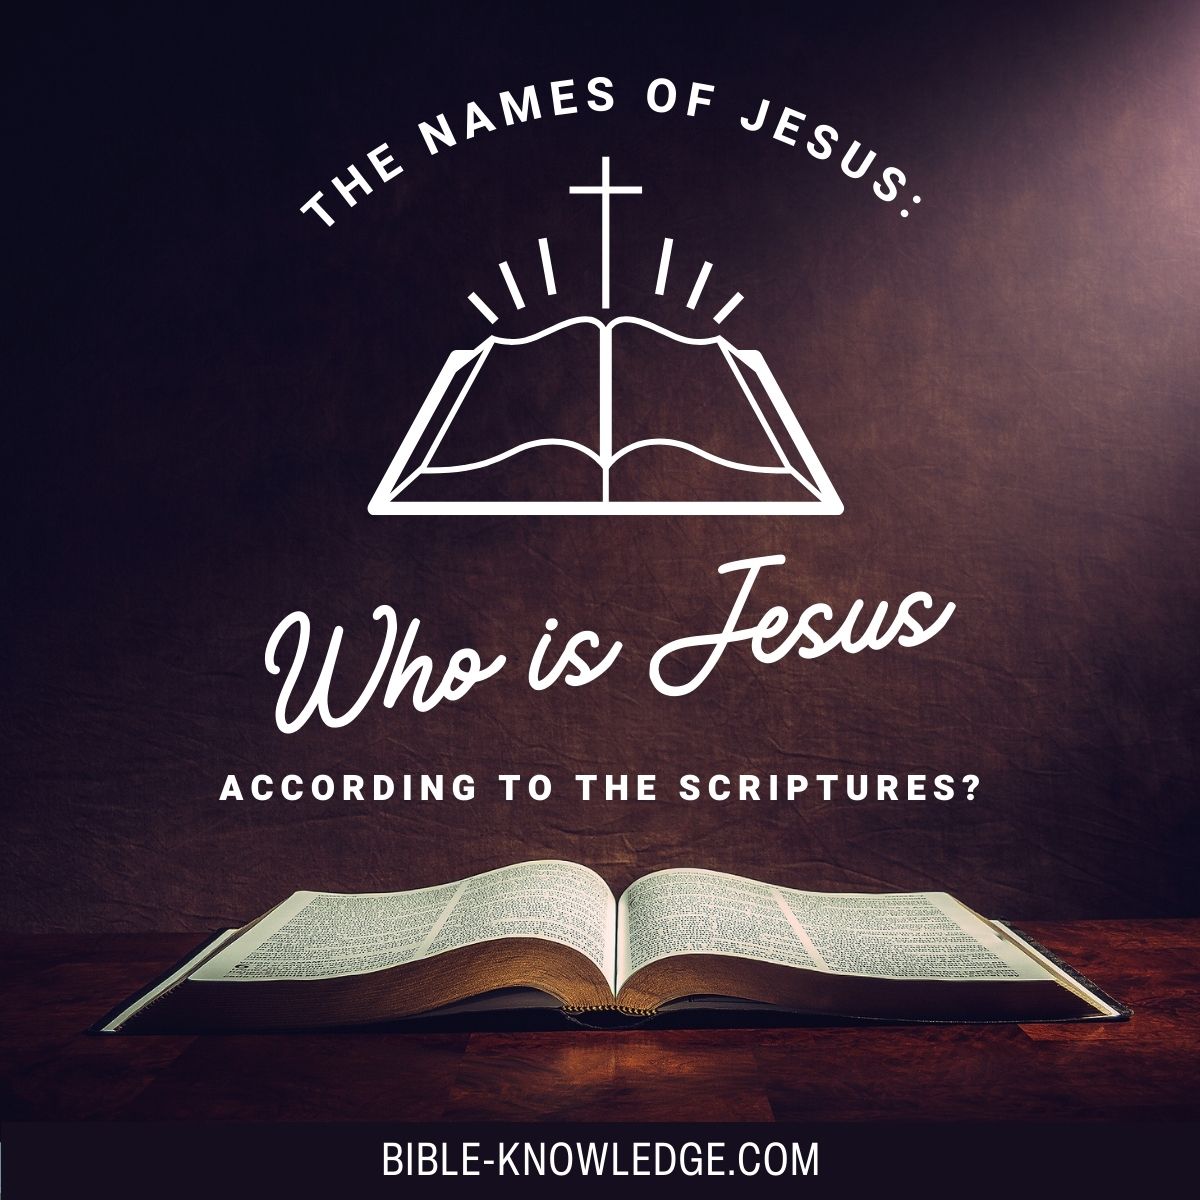 The Names of Jesus: Who is Jesus According to the Scriptures?